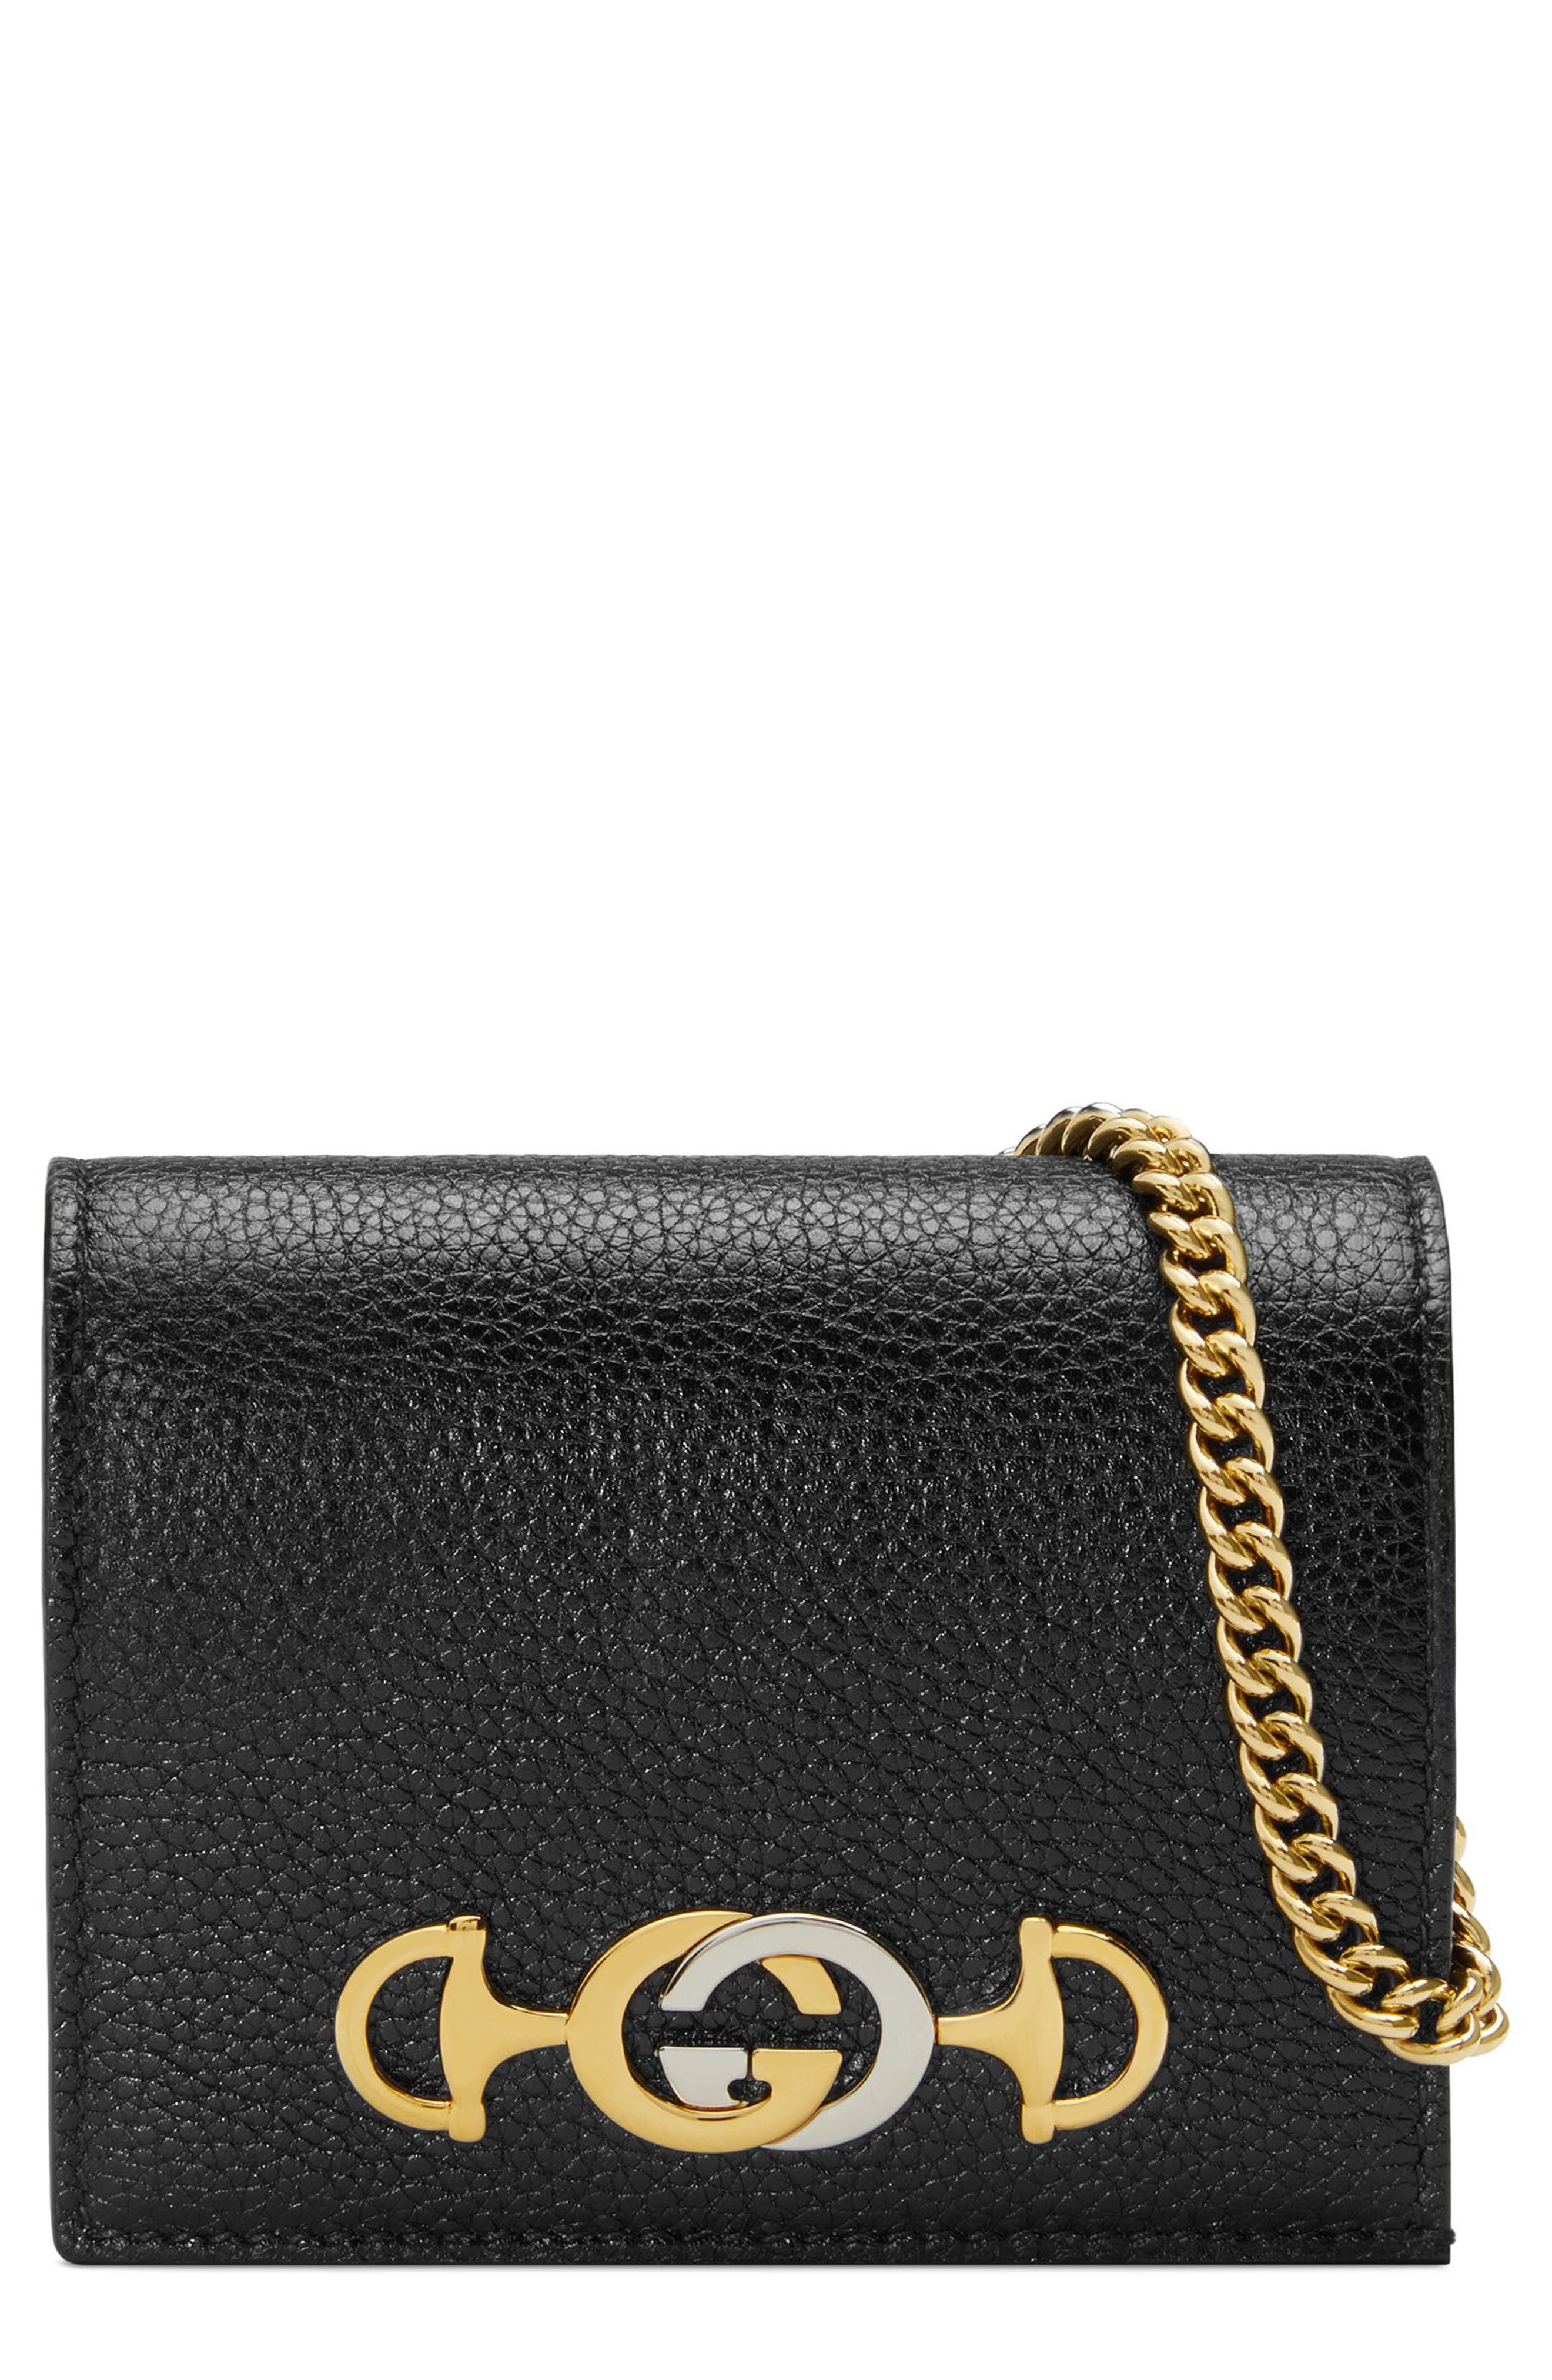 Gucci 655 Leather Wallet on a Chain 